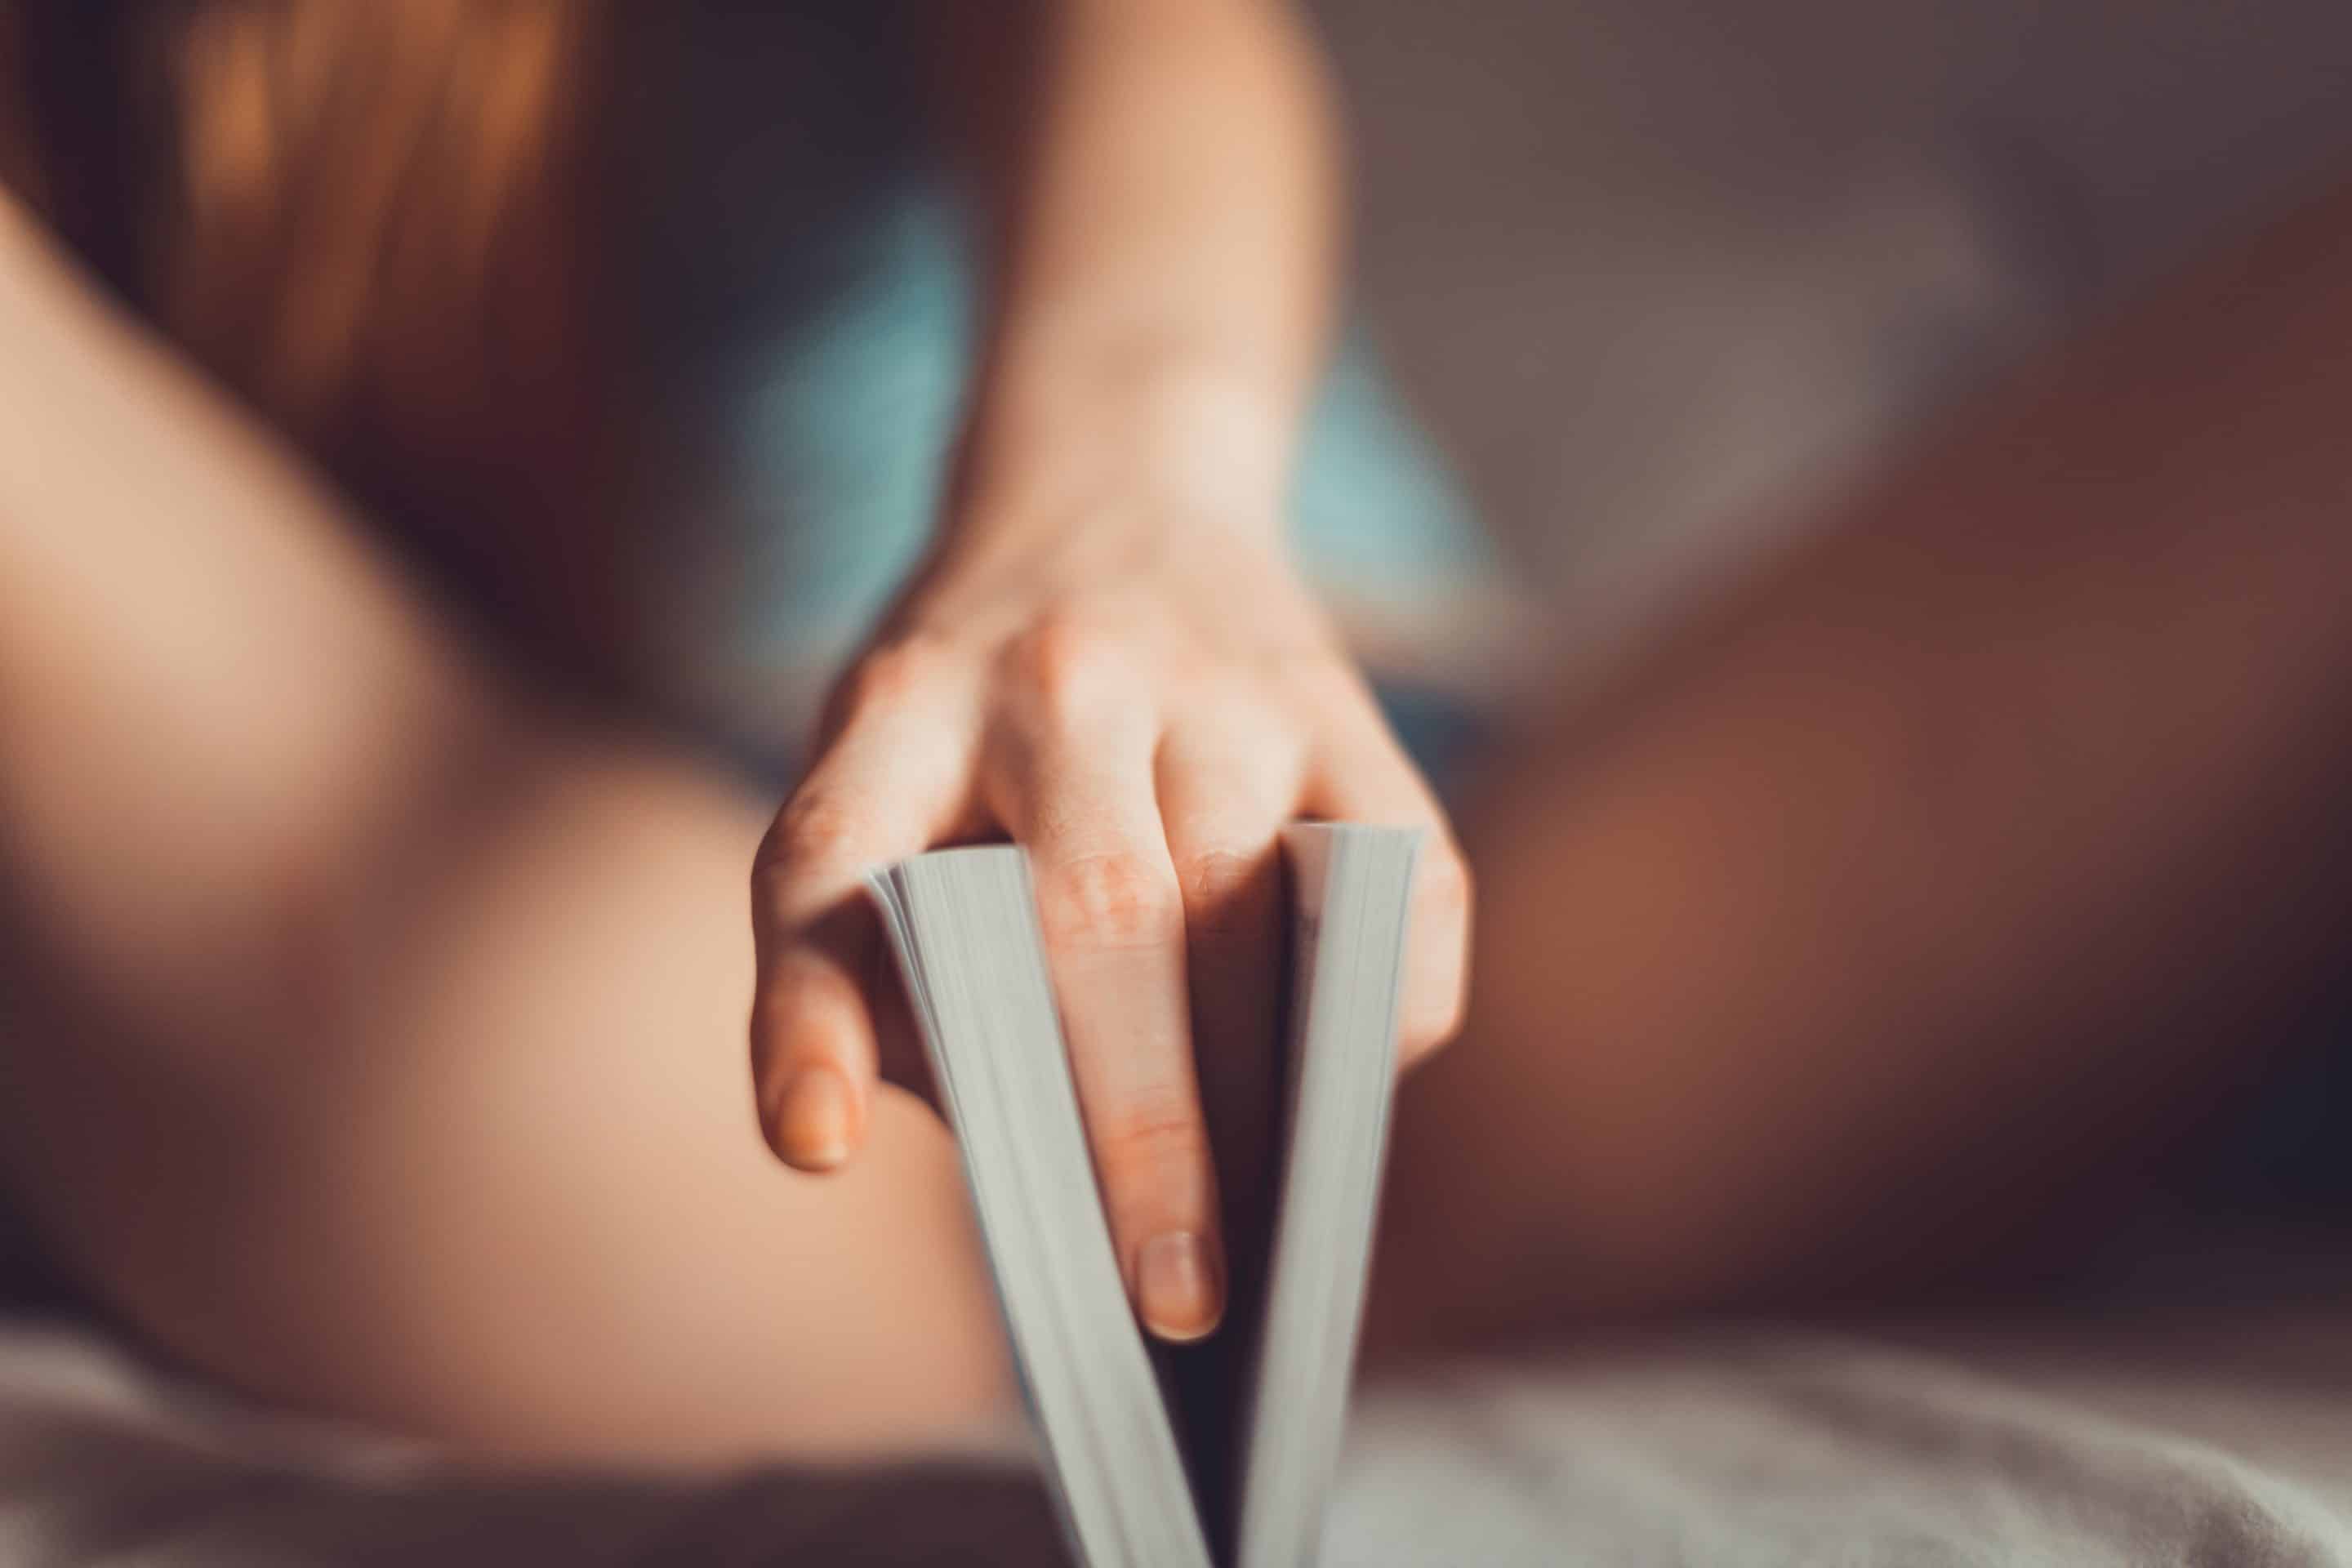 a girl on her underwear with condom on her side photo by Dainis Graveris from Unsplash